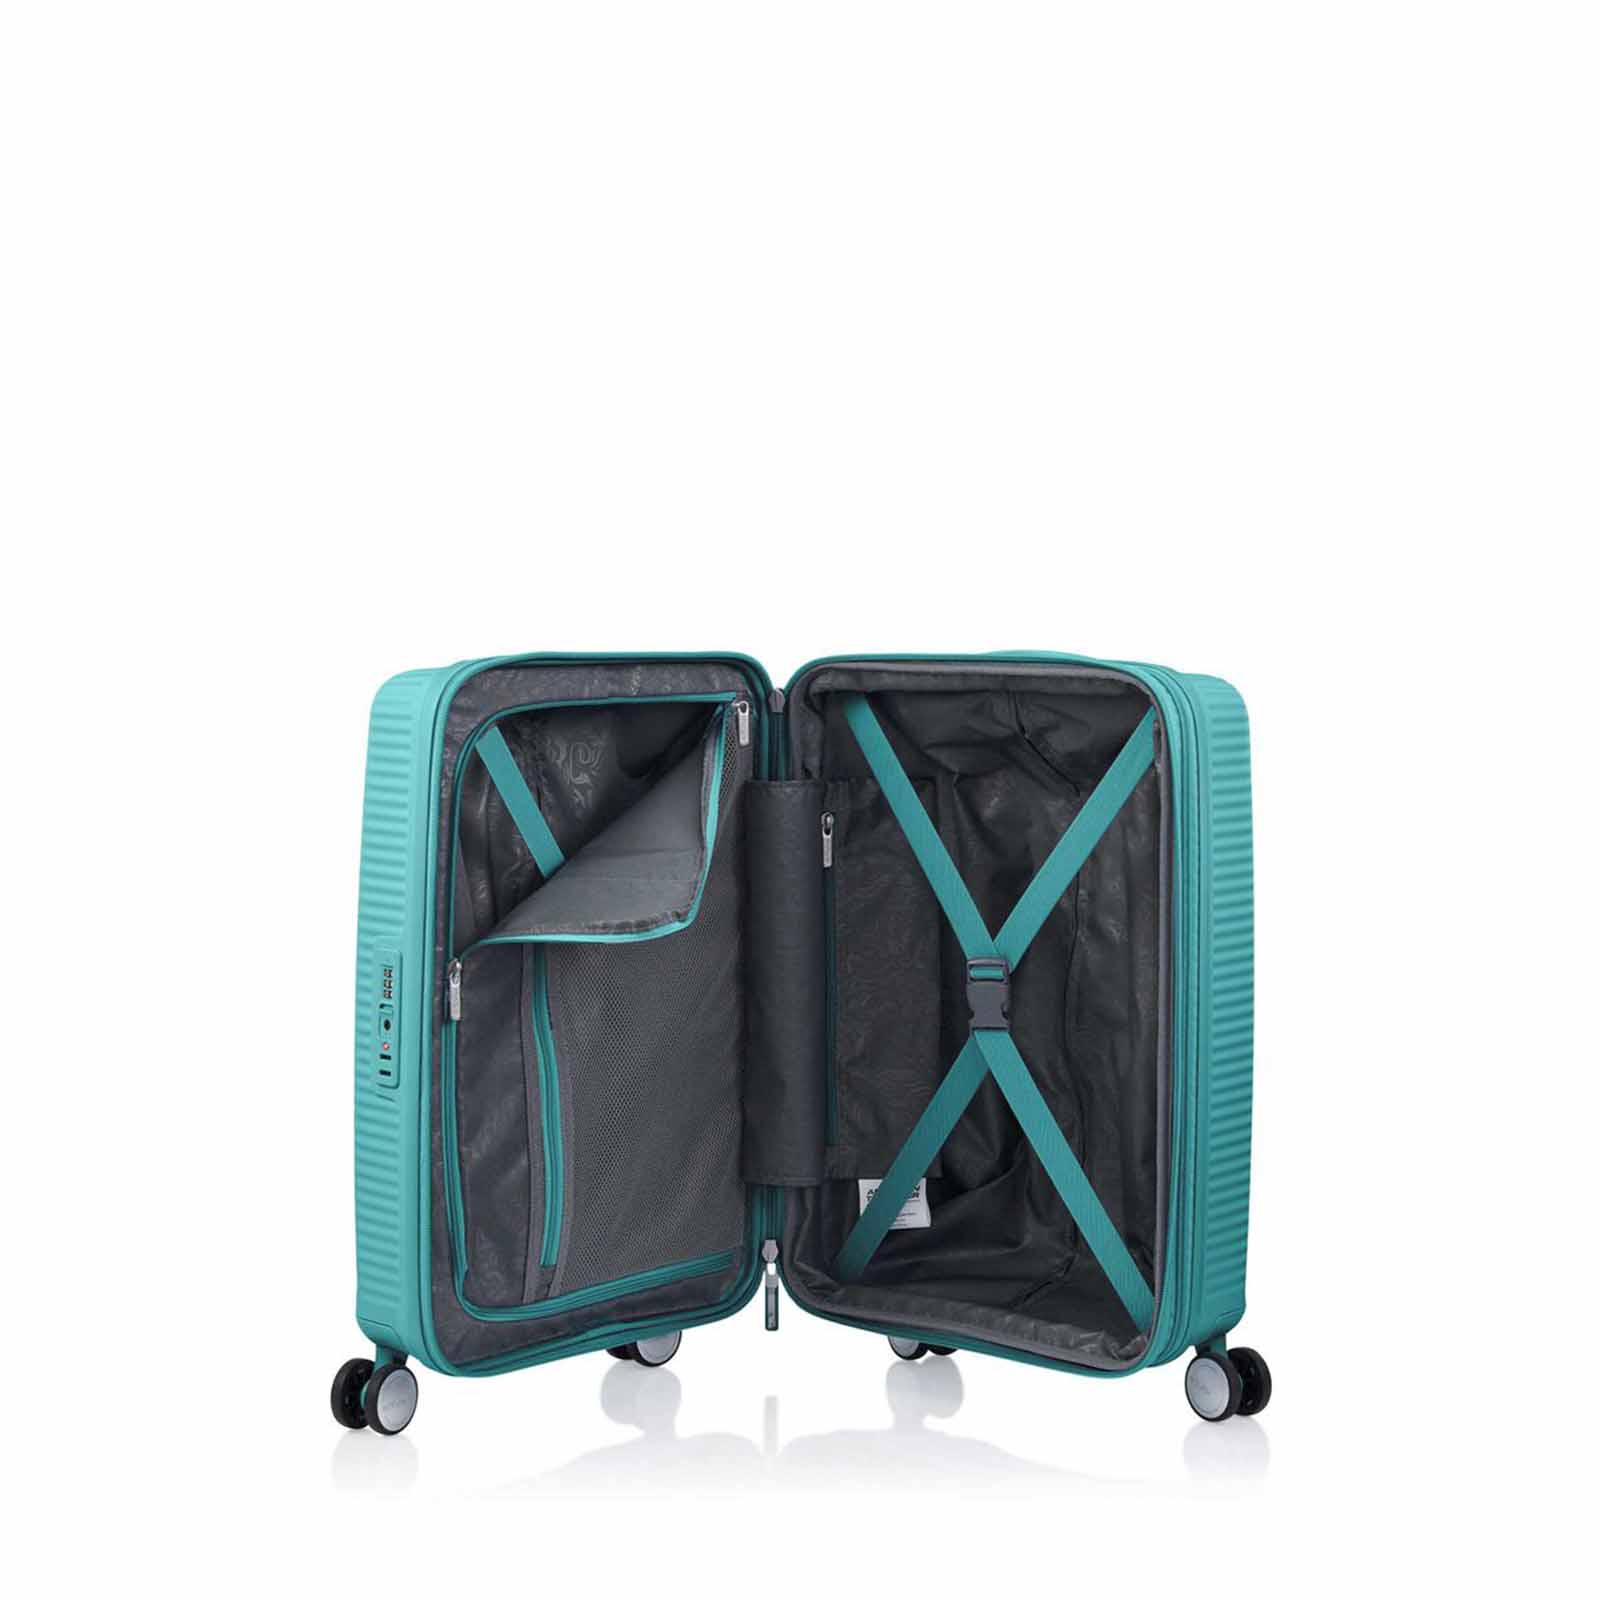 American-Tourister-Curio-2-55cm-Carry-On-Suitcase-Jade-Green-Open